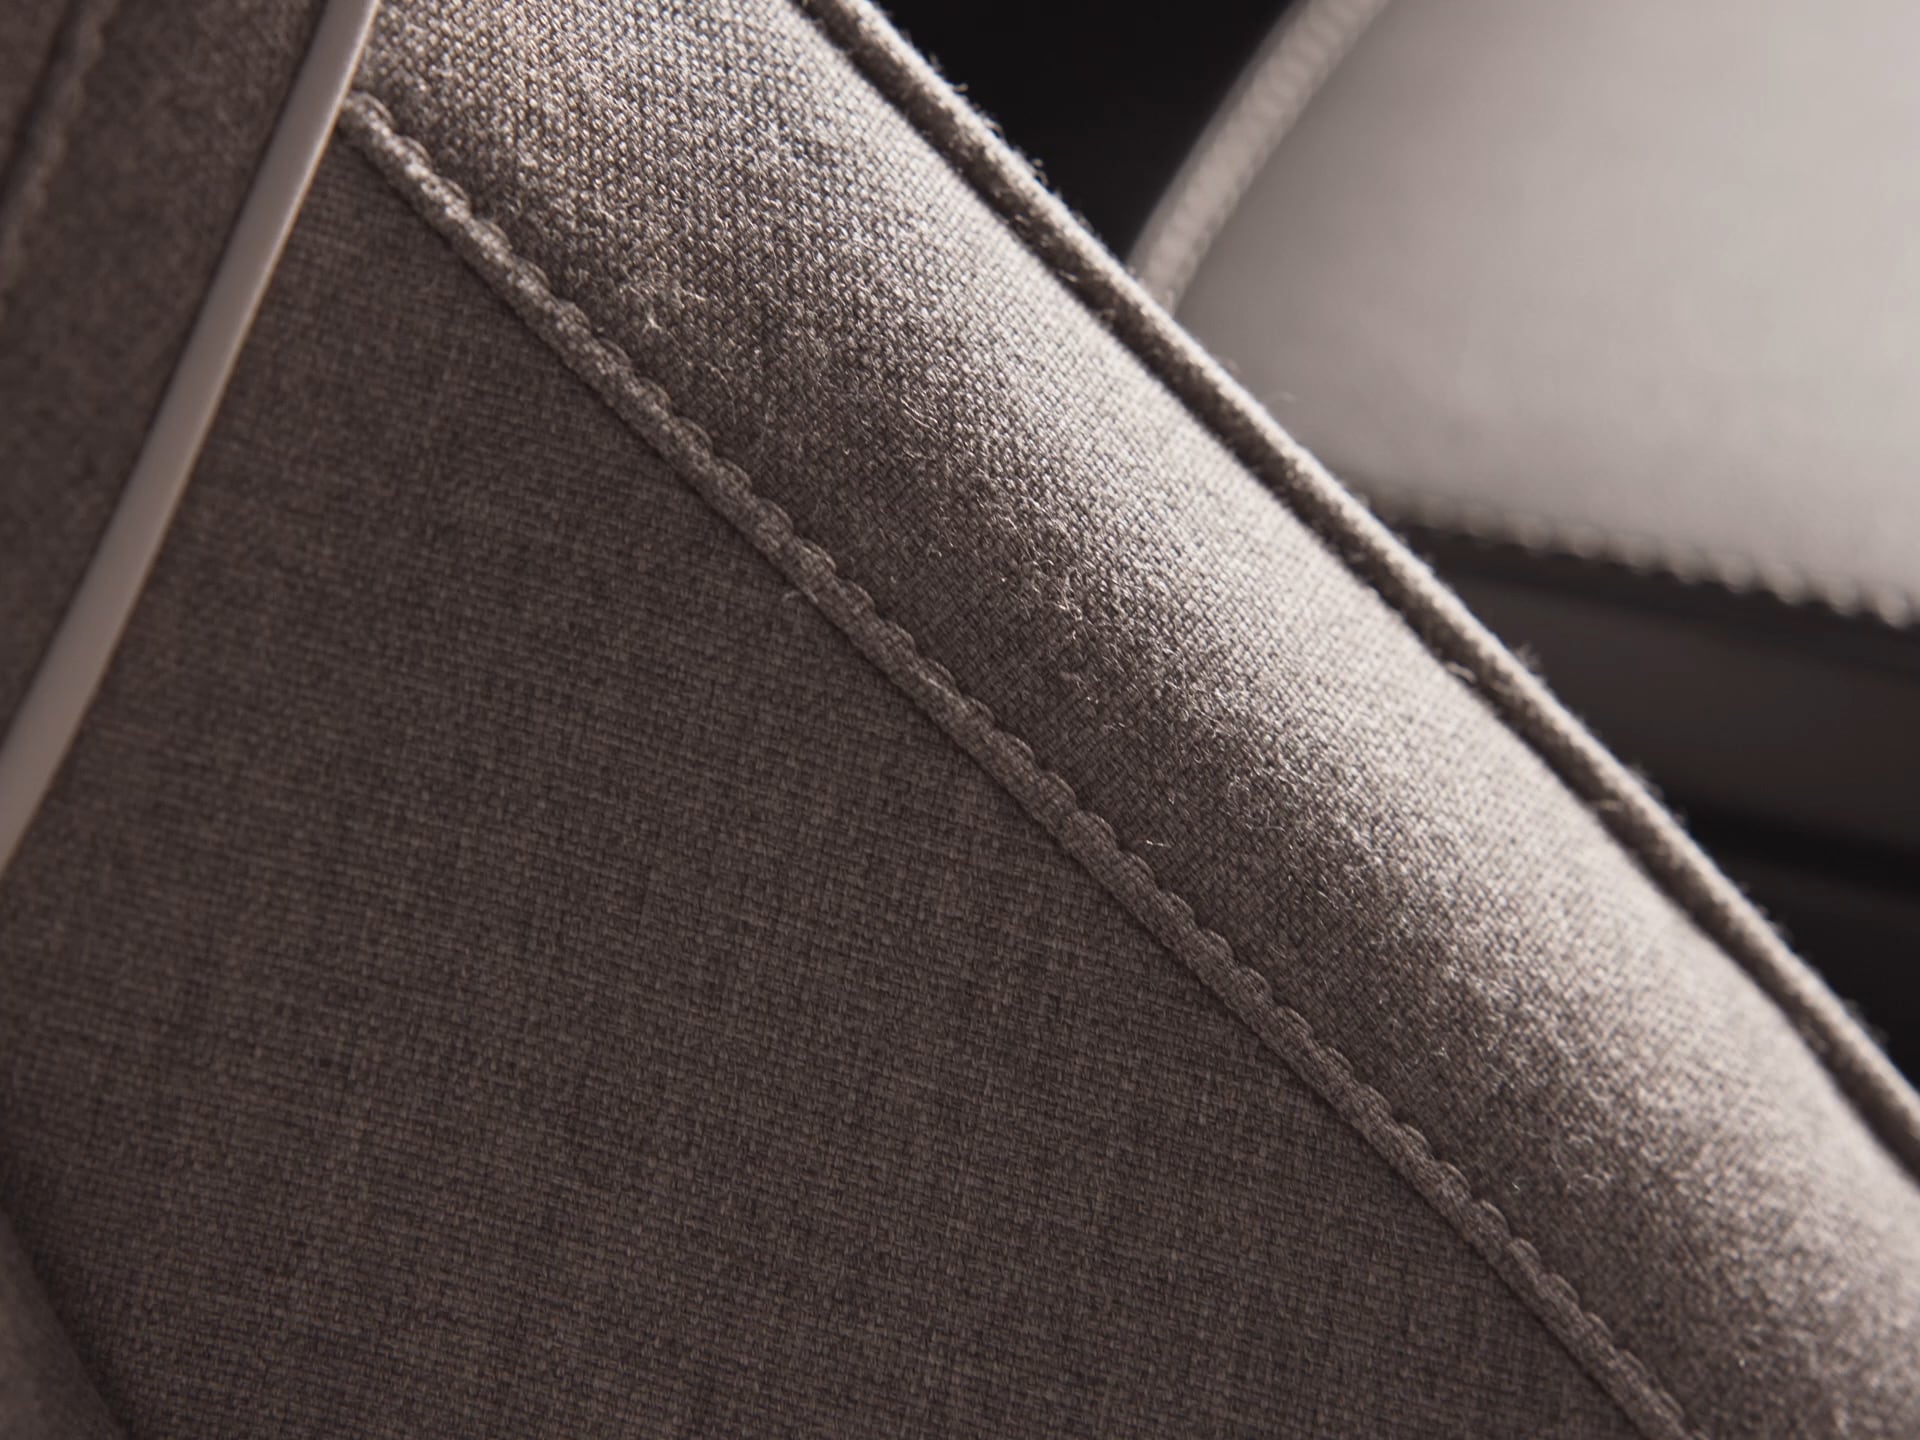 Interior close-up of the leather free Tailored Wool Blend seats in a Volvo V60 Recharge.